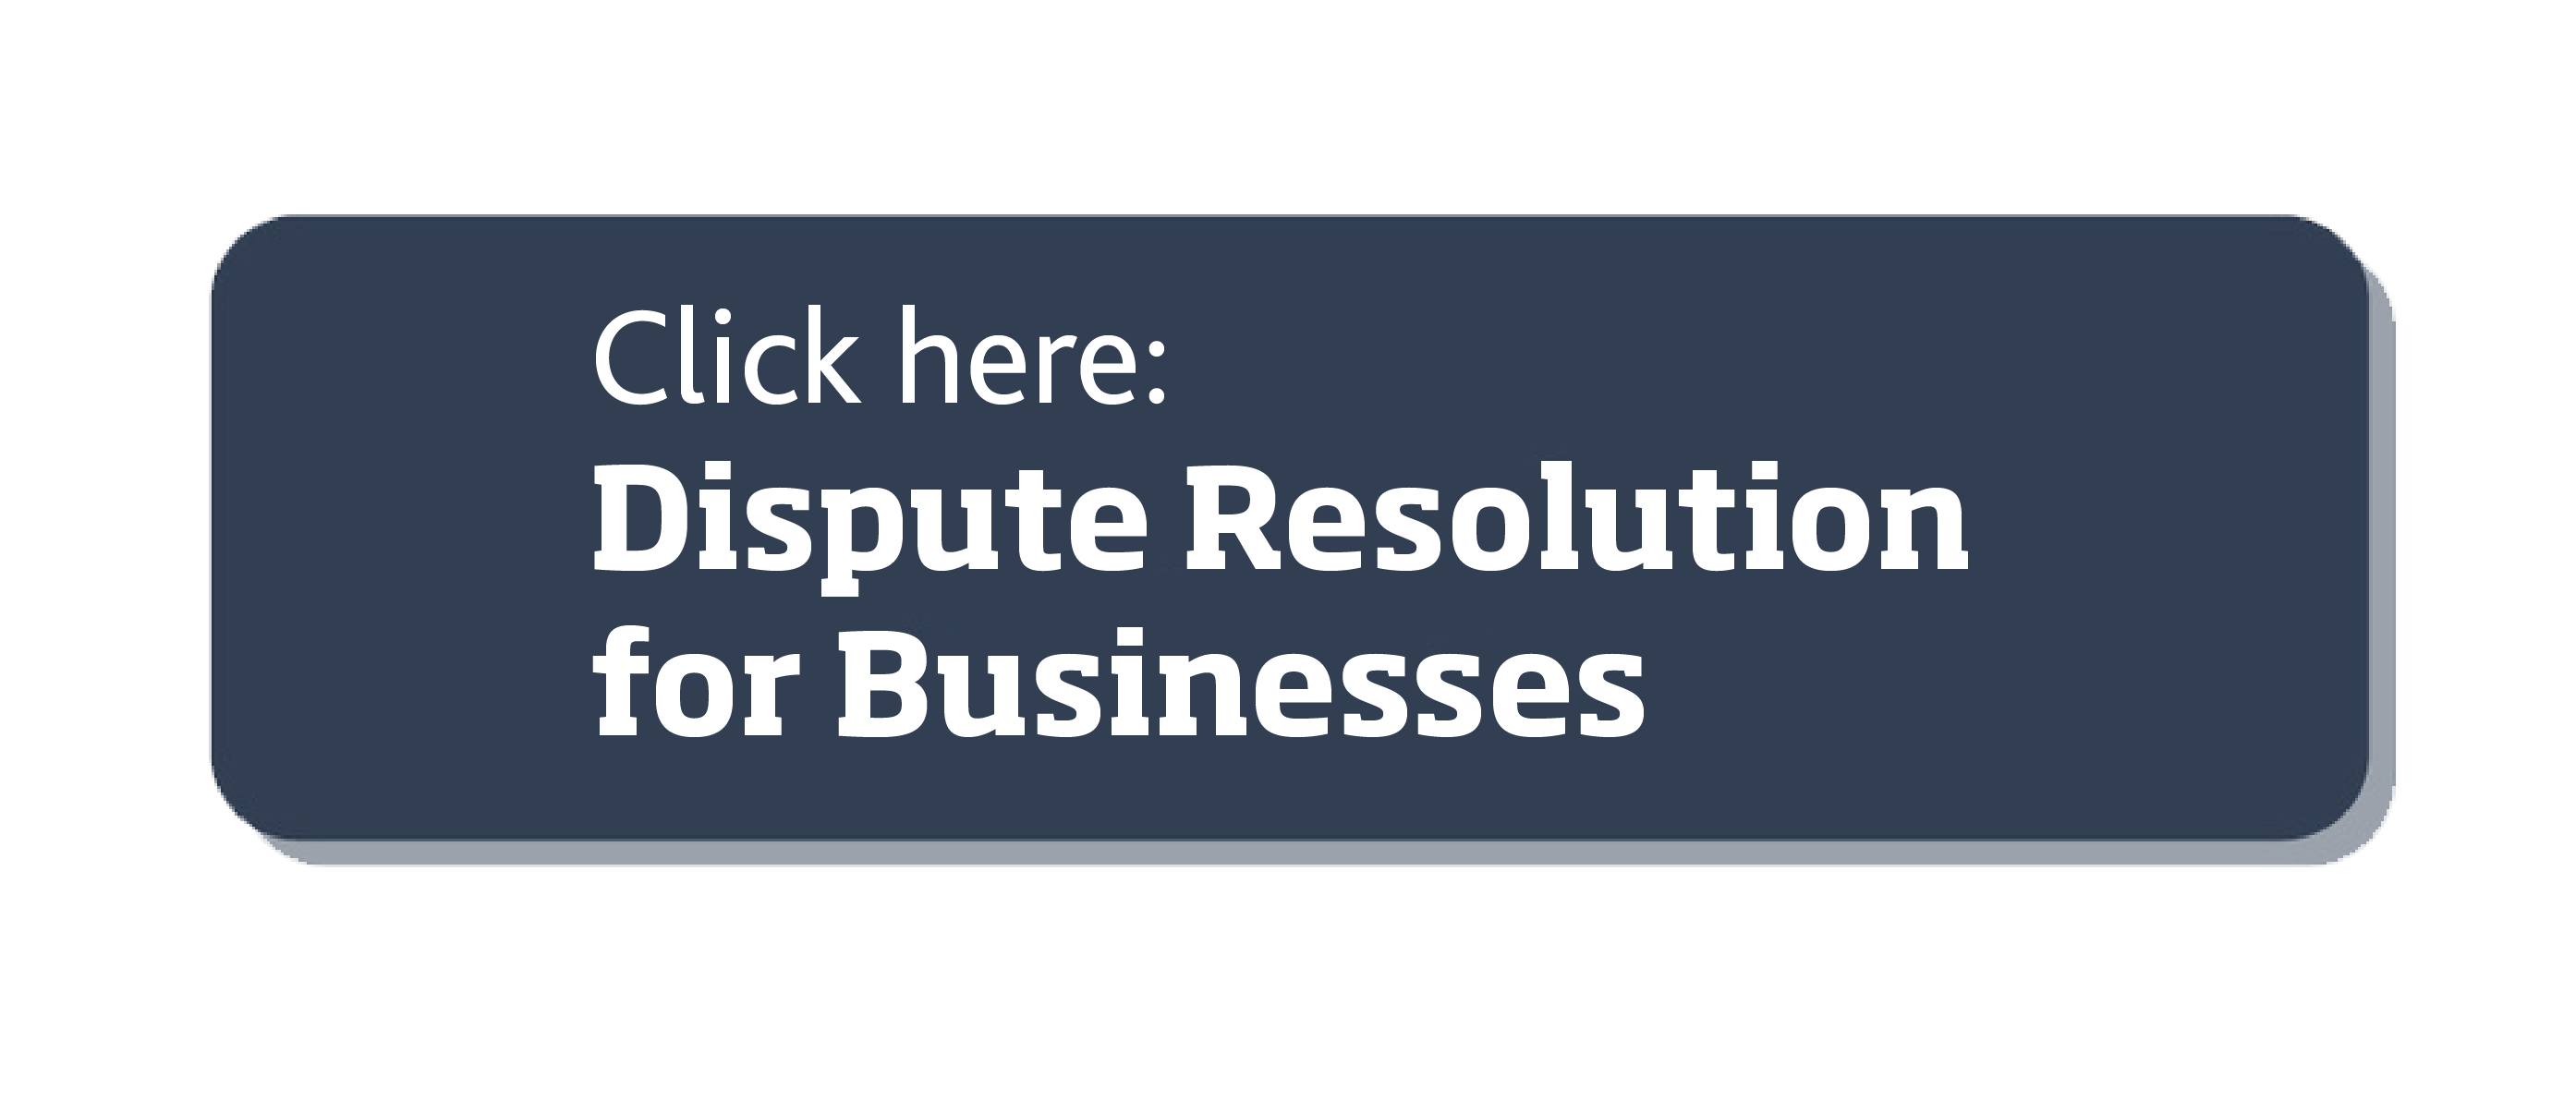 Dispute Resolution for Businesses button